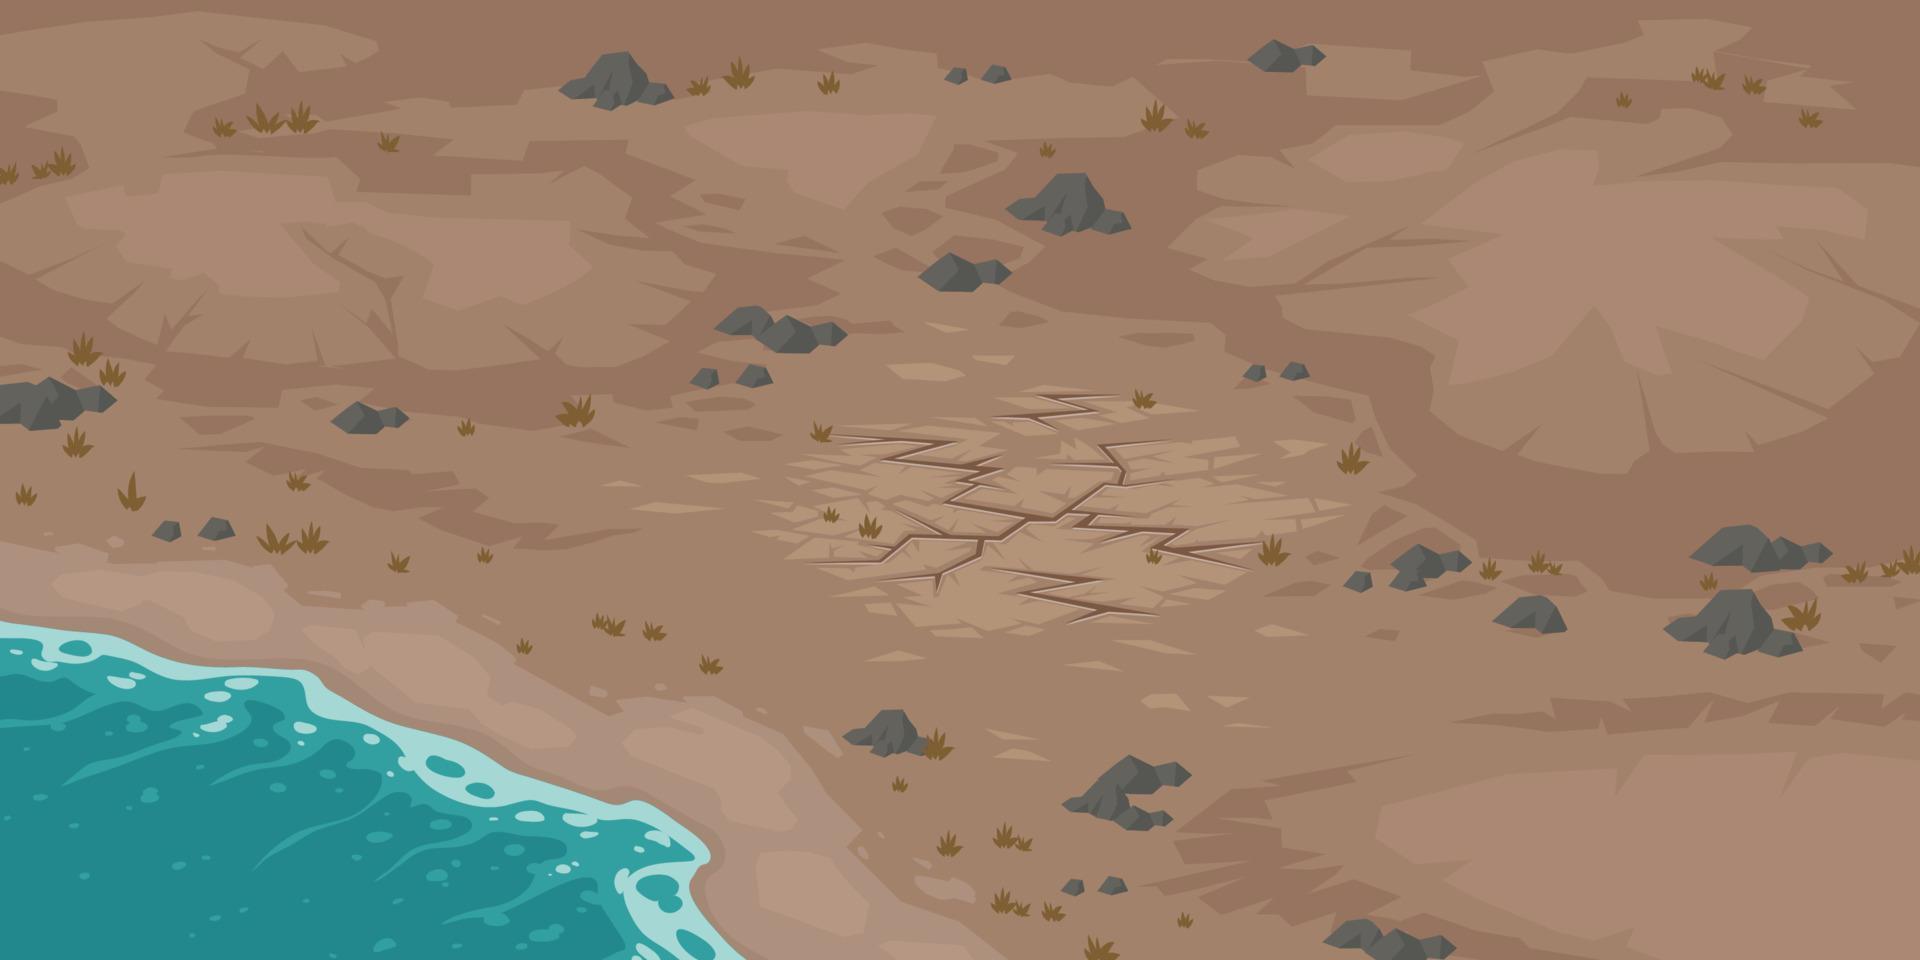 Sea beach and wasteland with dry cracked soil vector